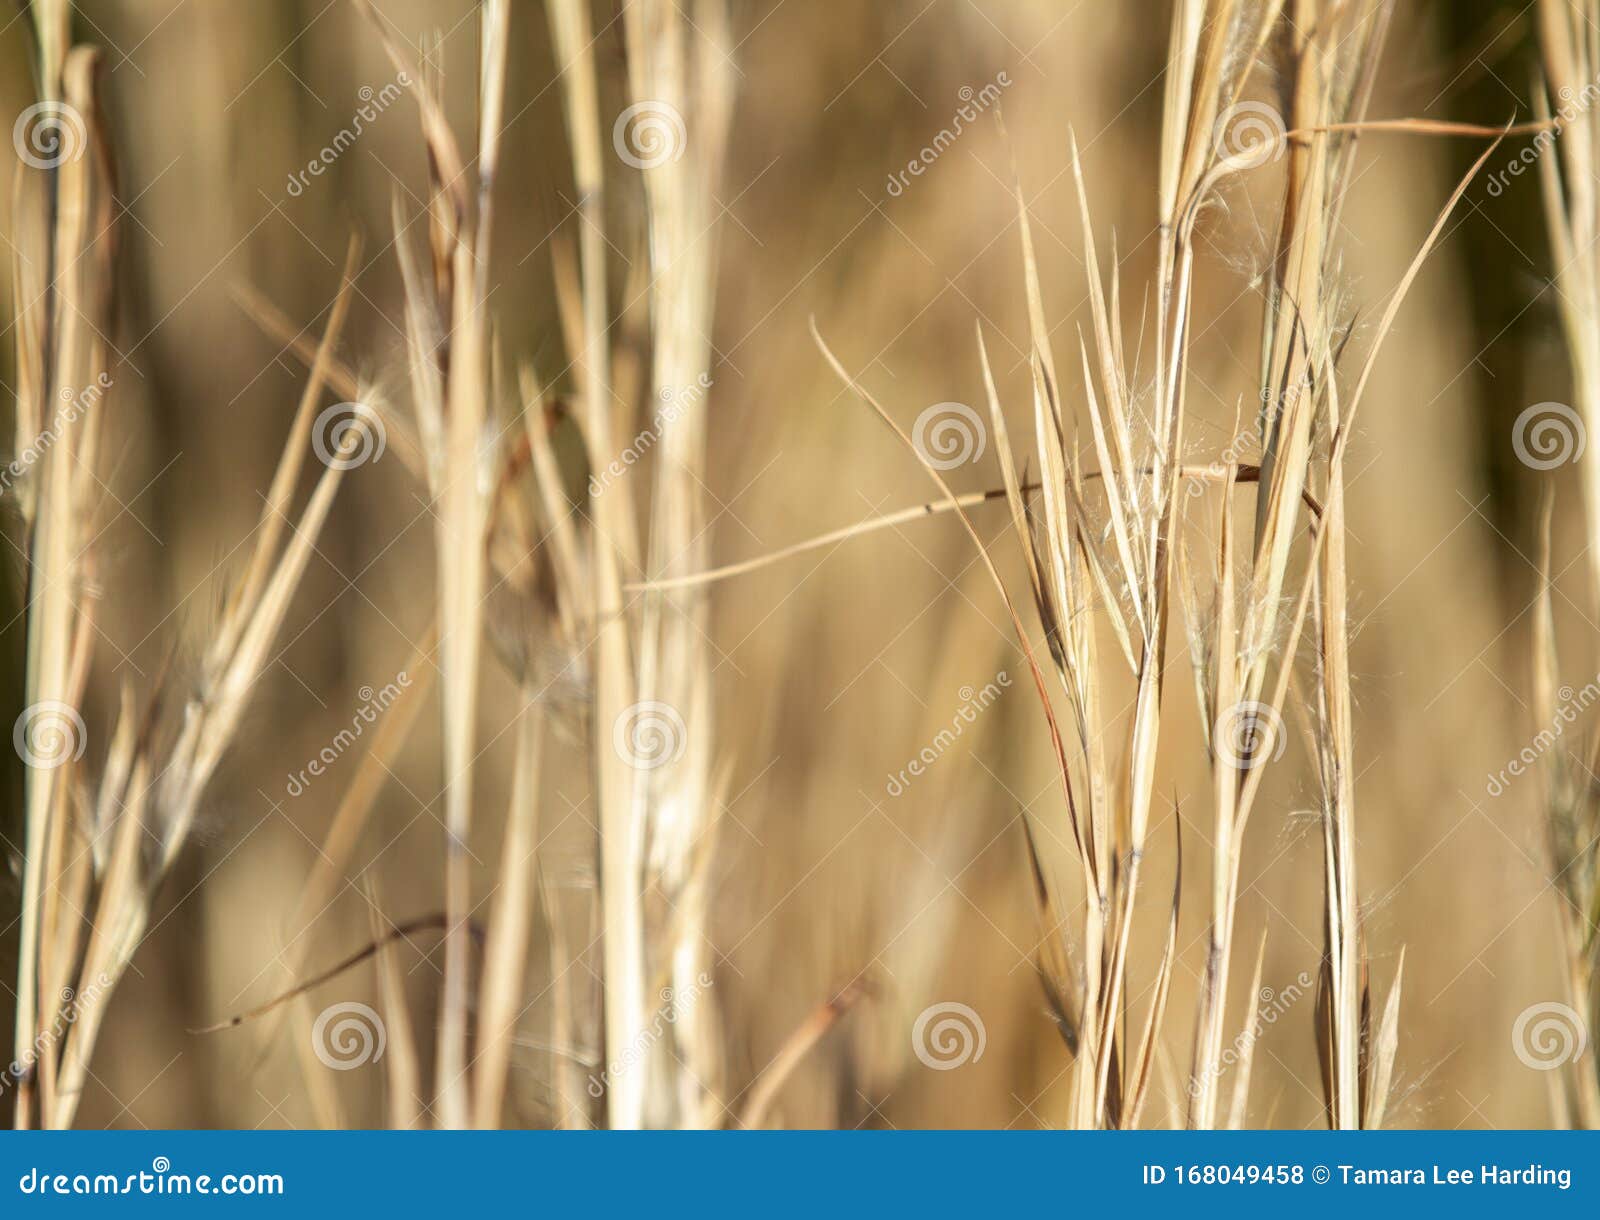 Golden Grass Blurred Background for Harvest or Autumn Stock Photo